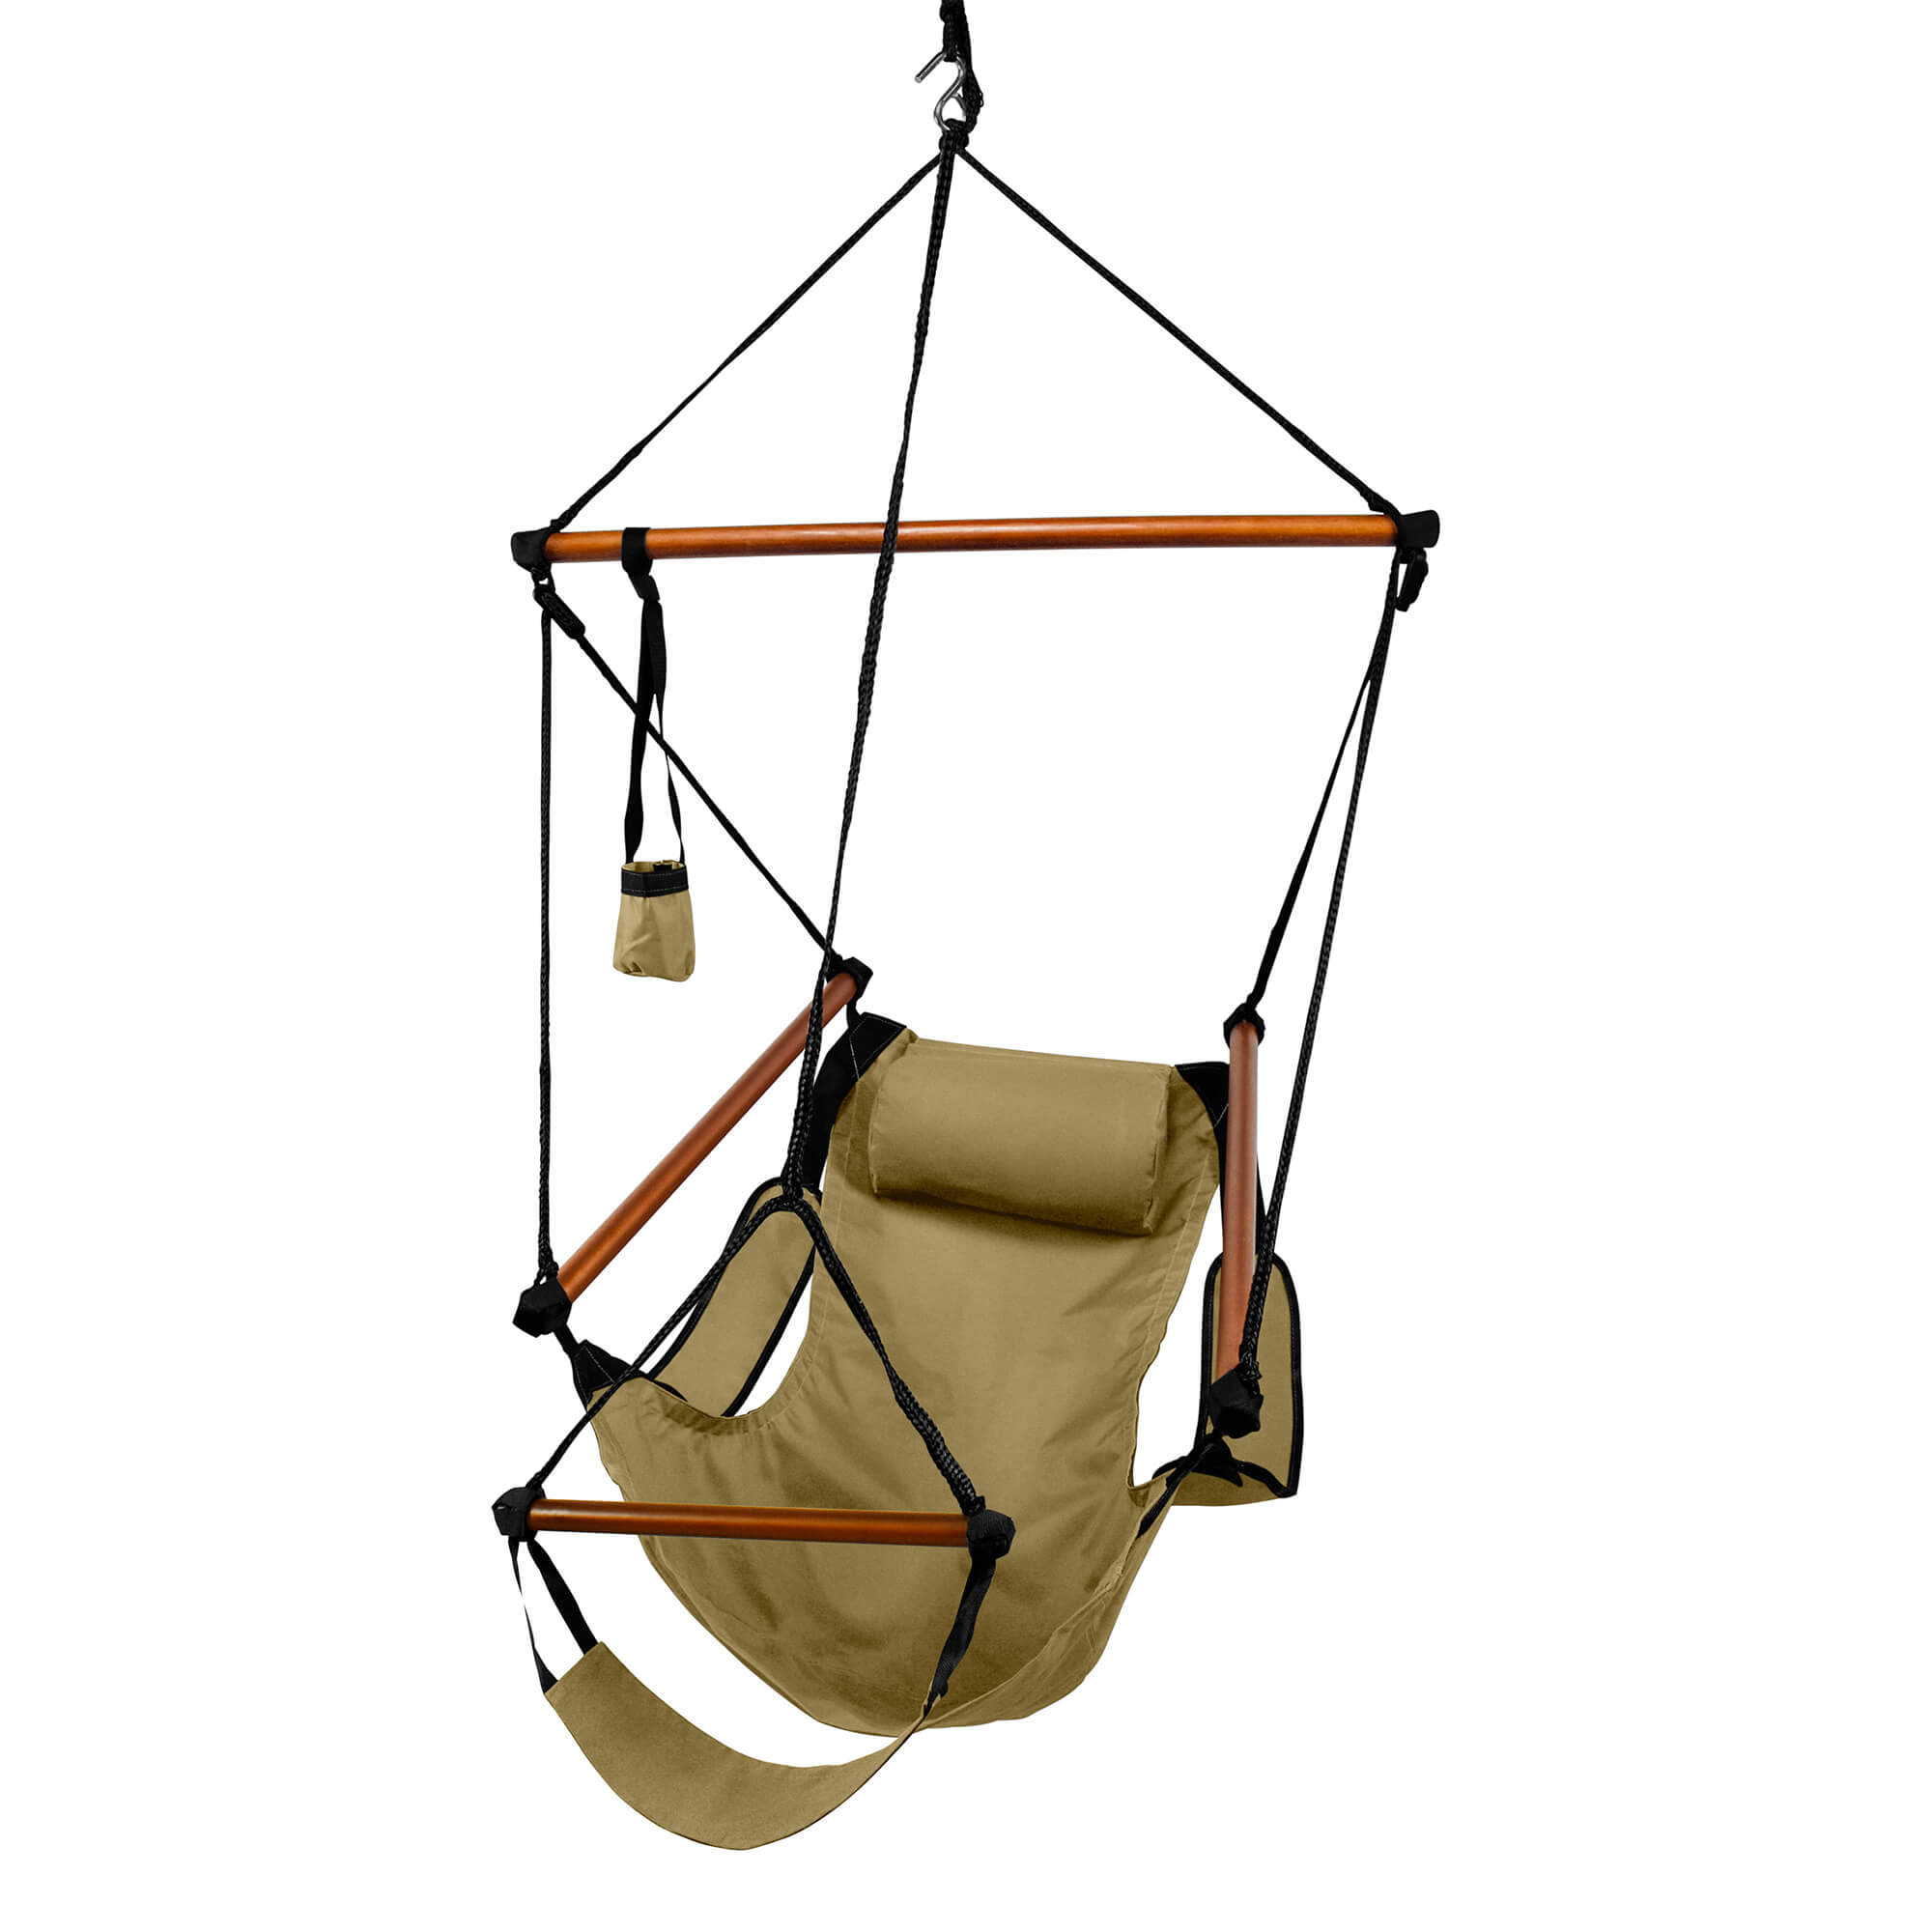 Hanging Chair Hammock with Footrest